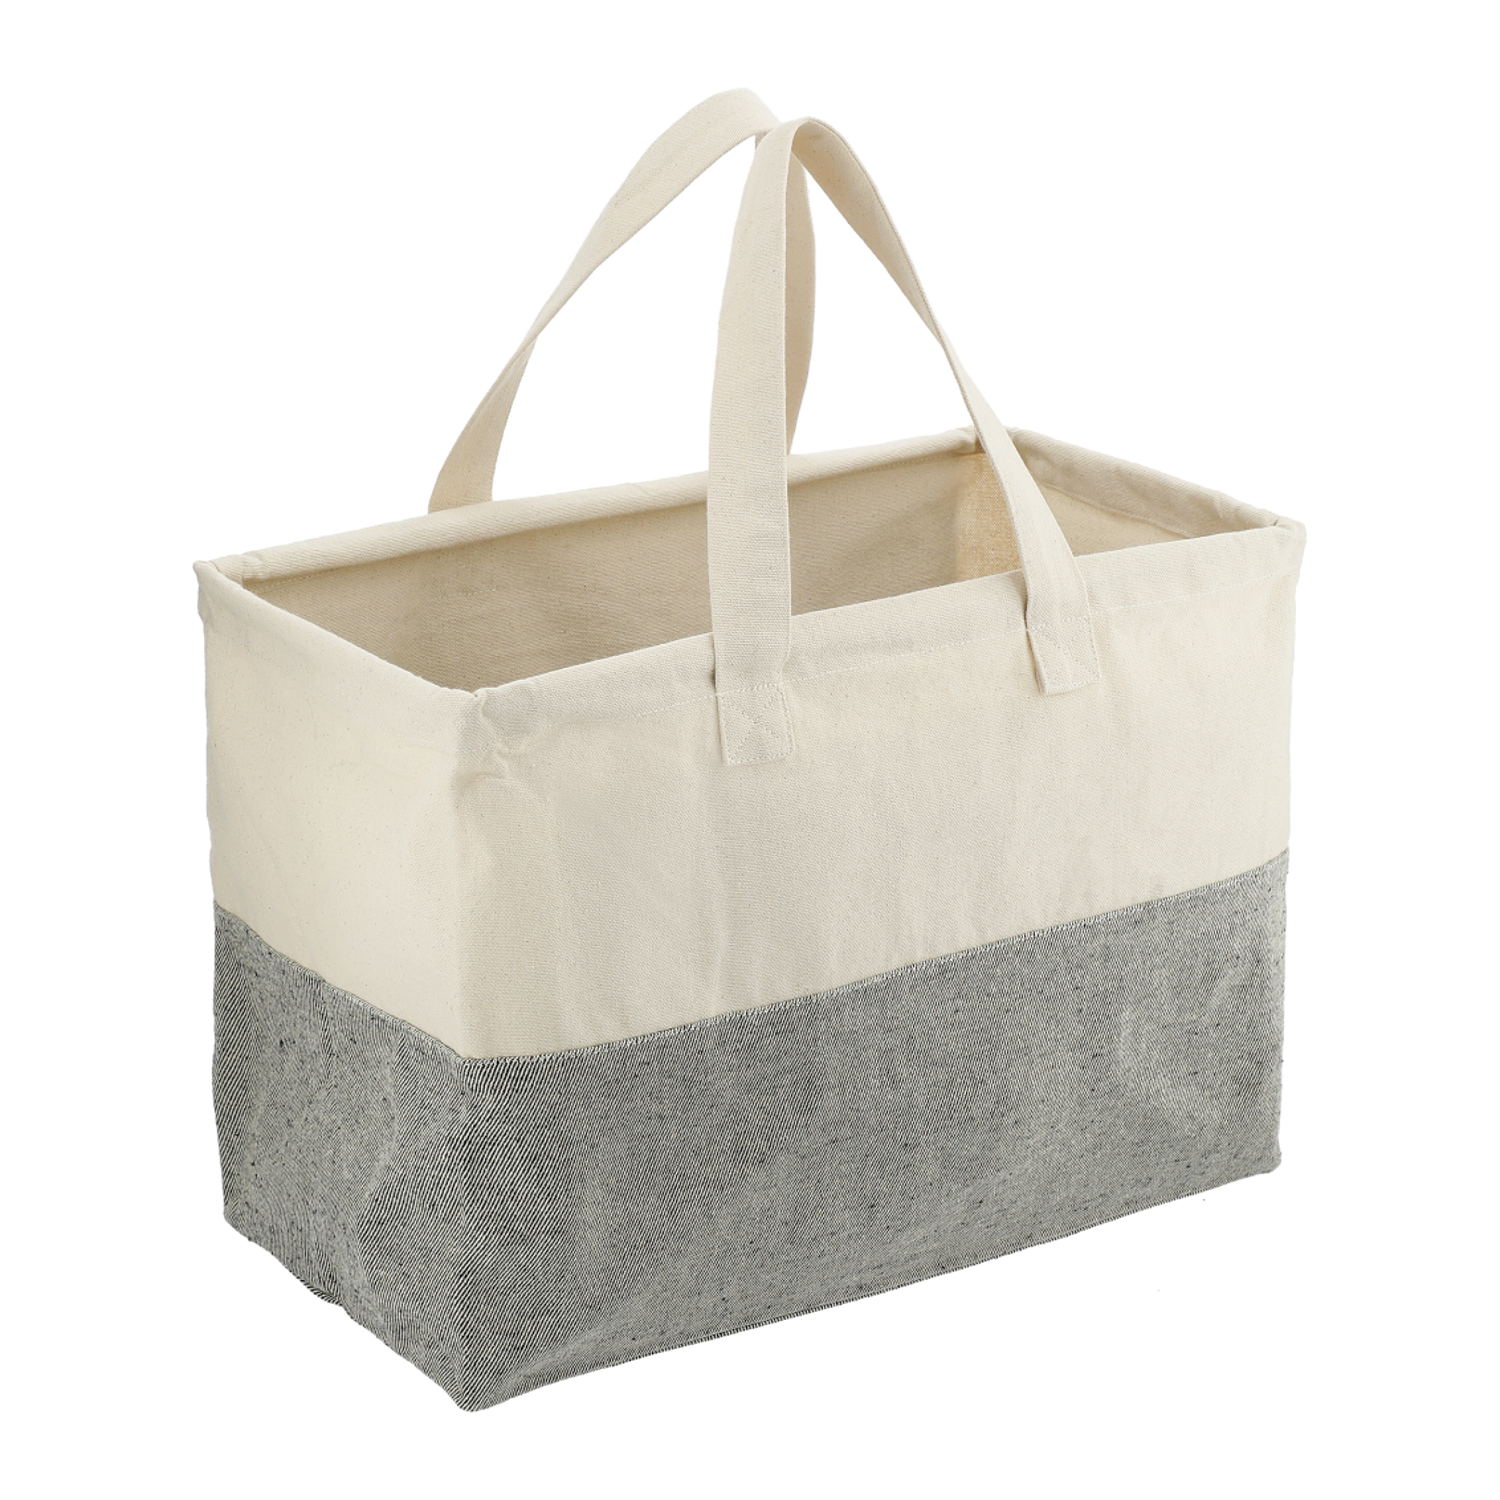 LEEDS 7901-18 - Recycled Cotton Utility Tote